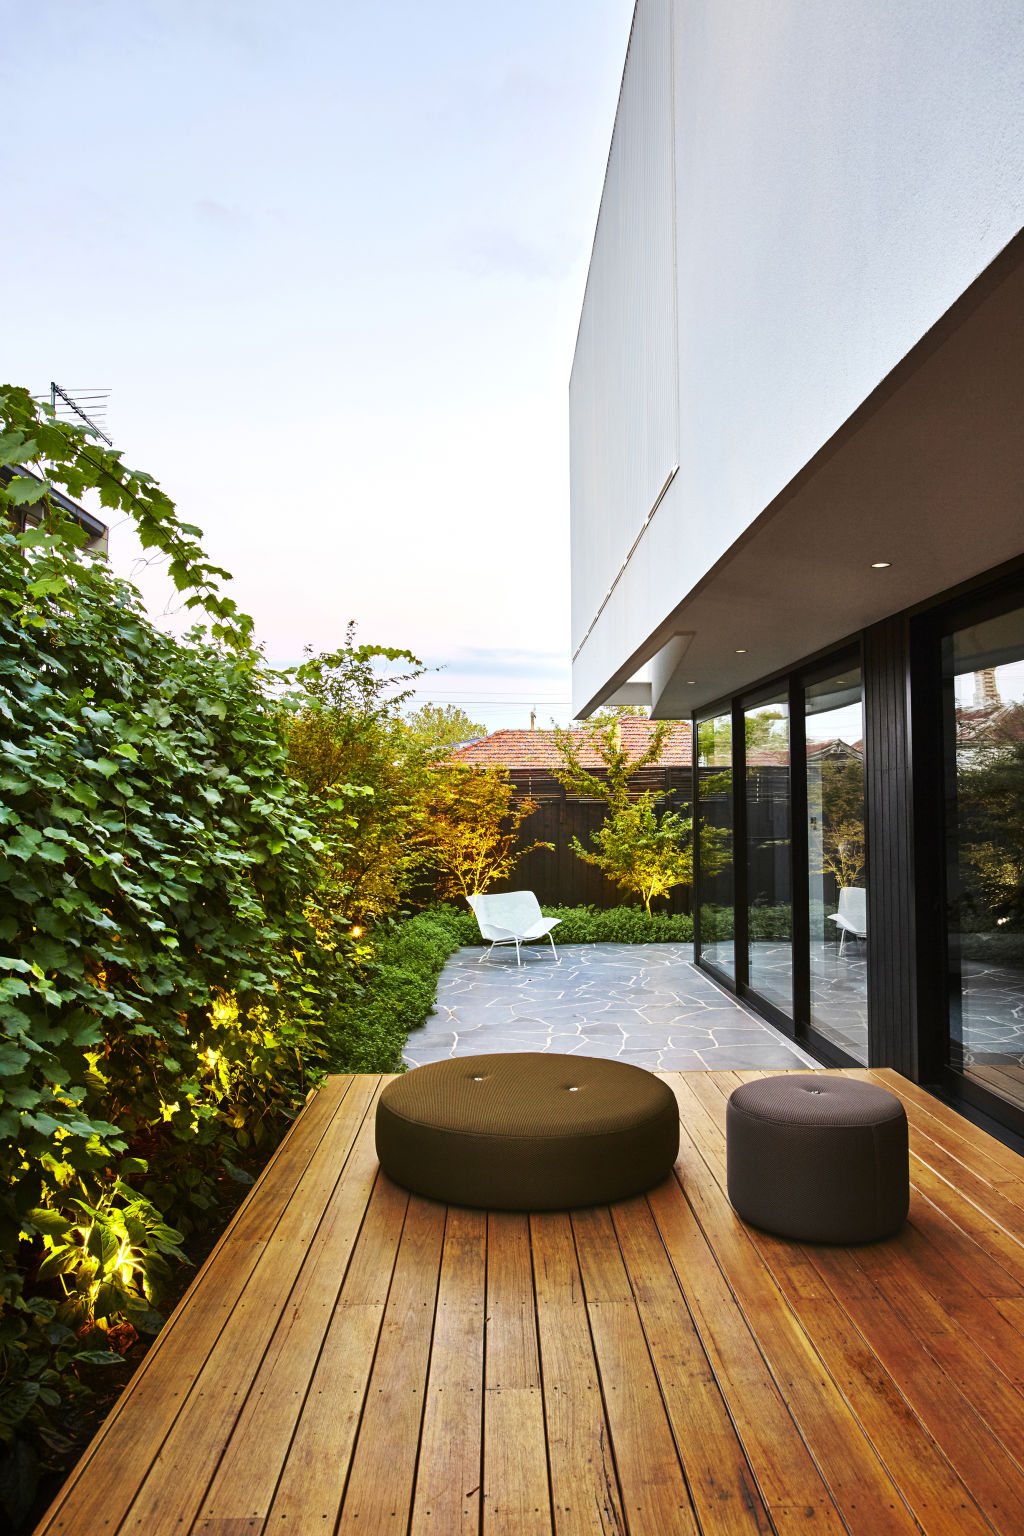 There are a variety of ways to unlock its potential and transform it into a thriving, garden oasis. Photo: Dave Kulesza